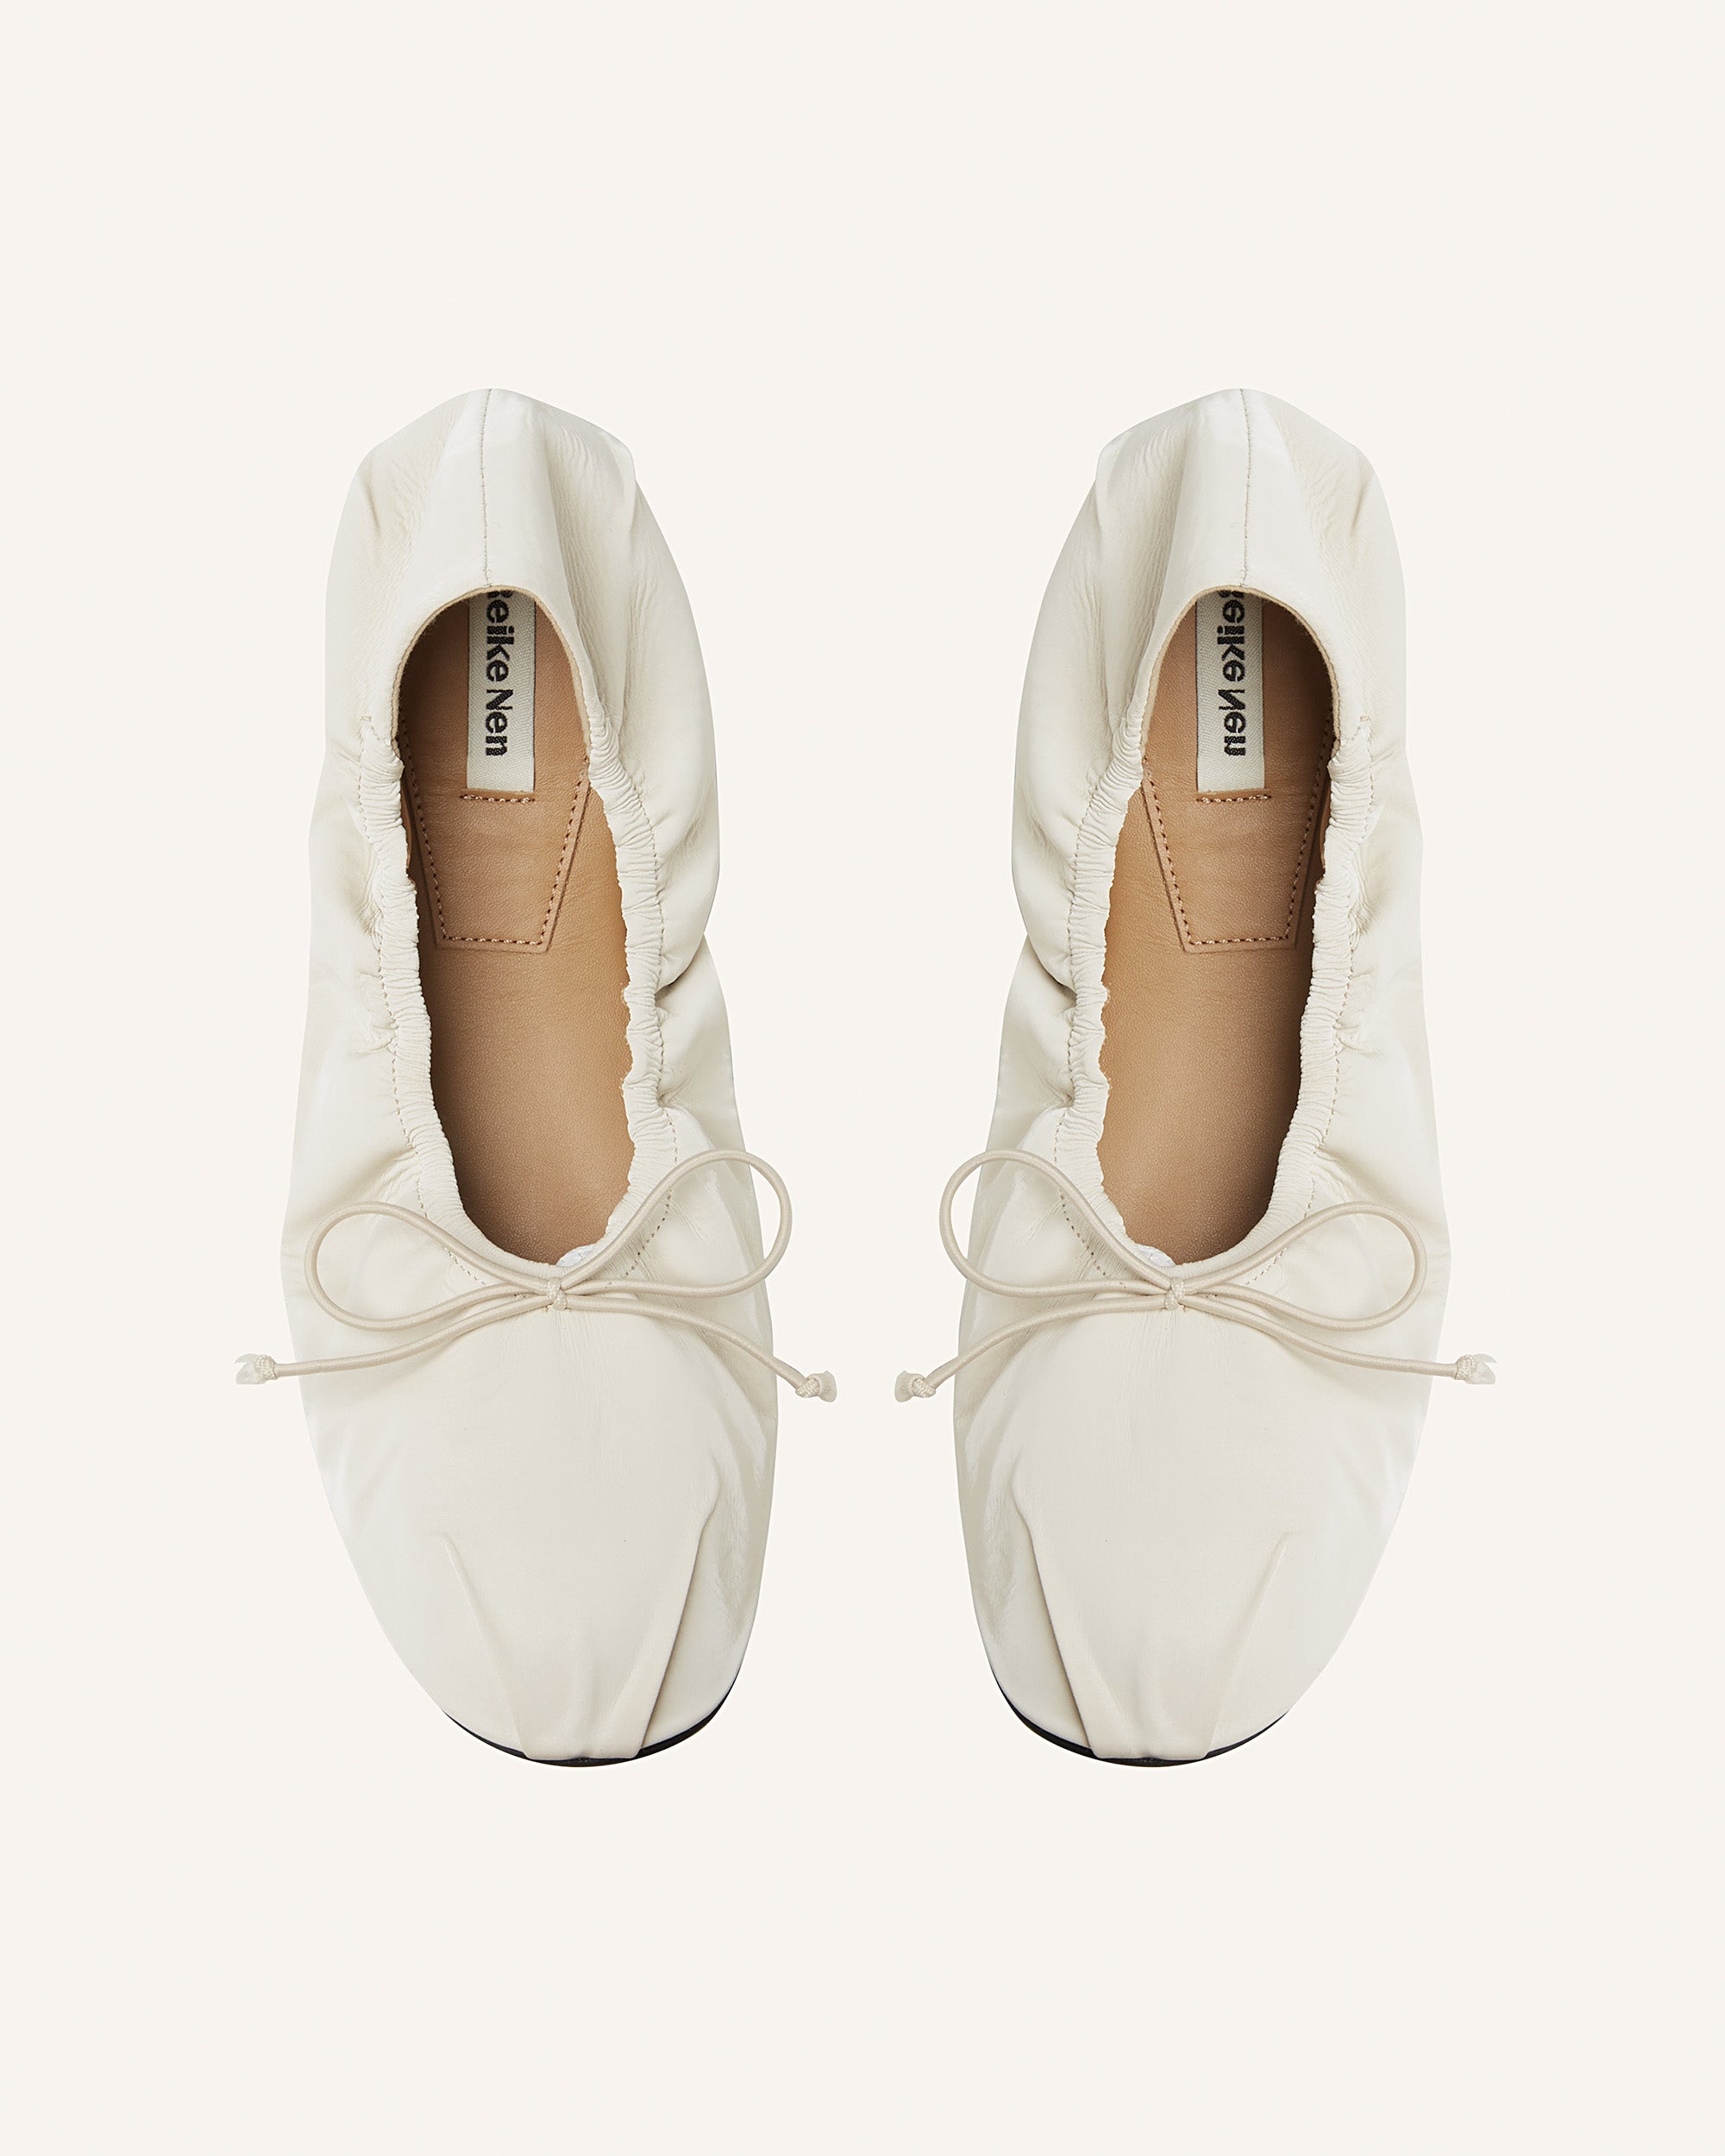 The Best Ballet Shoes of 2019